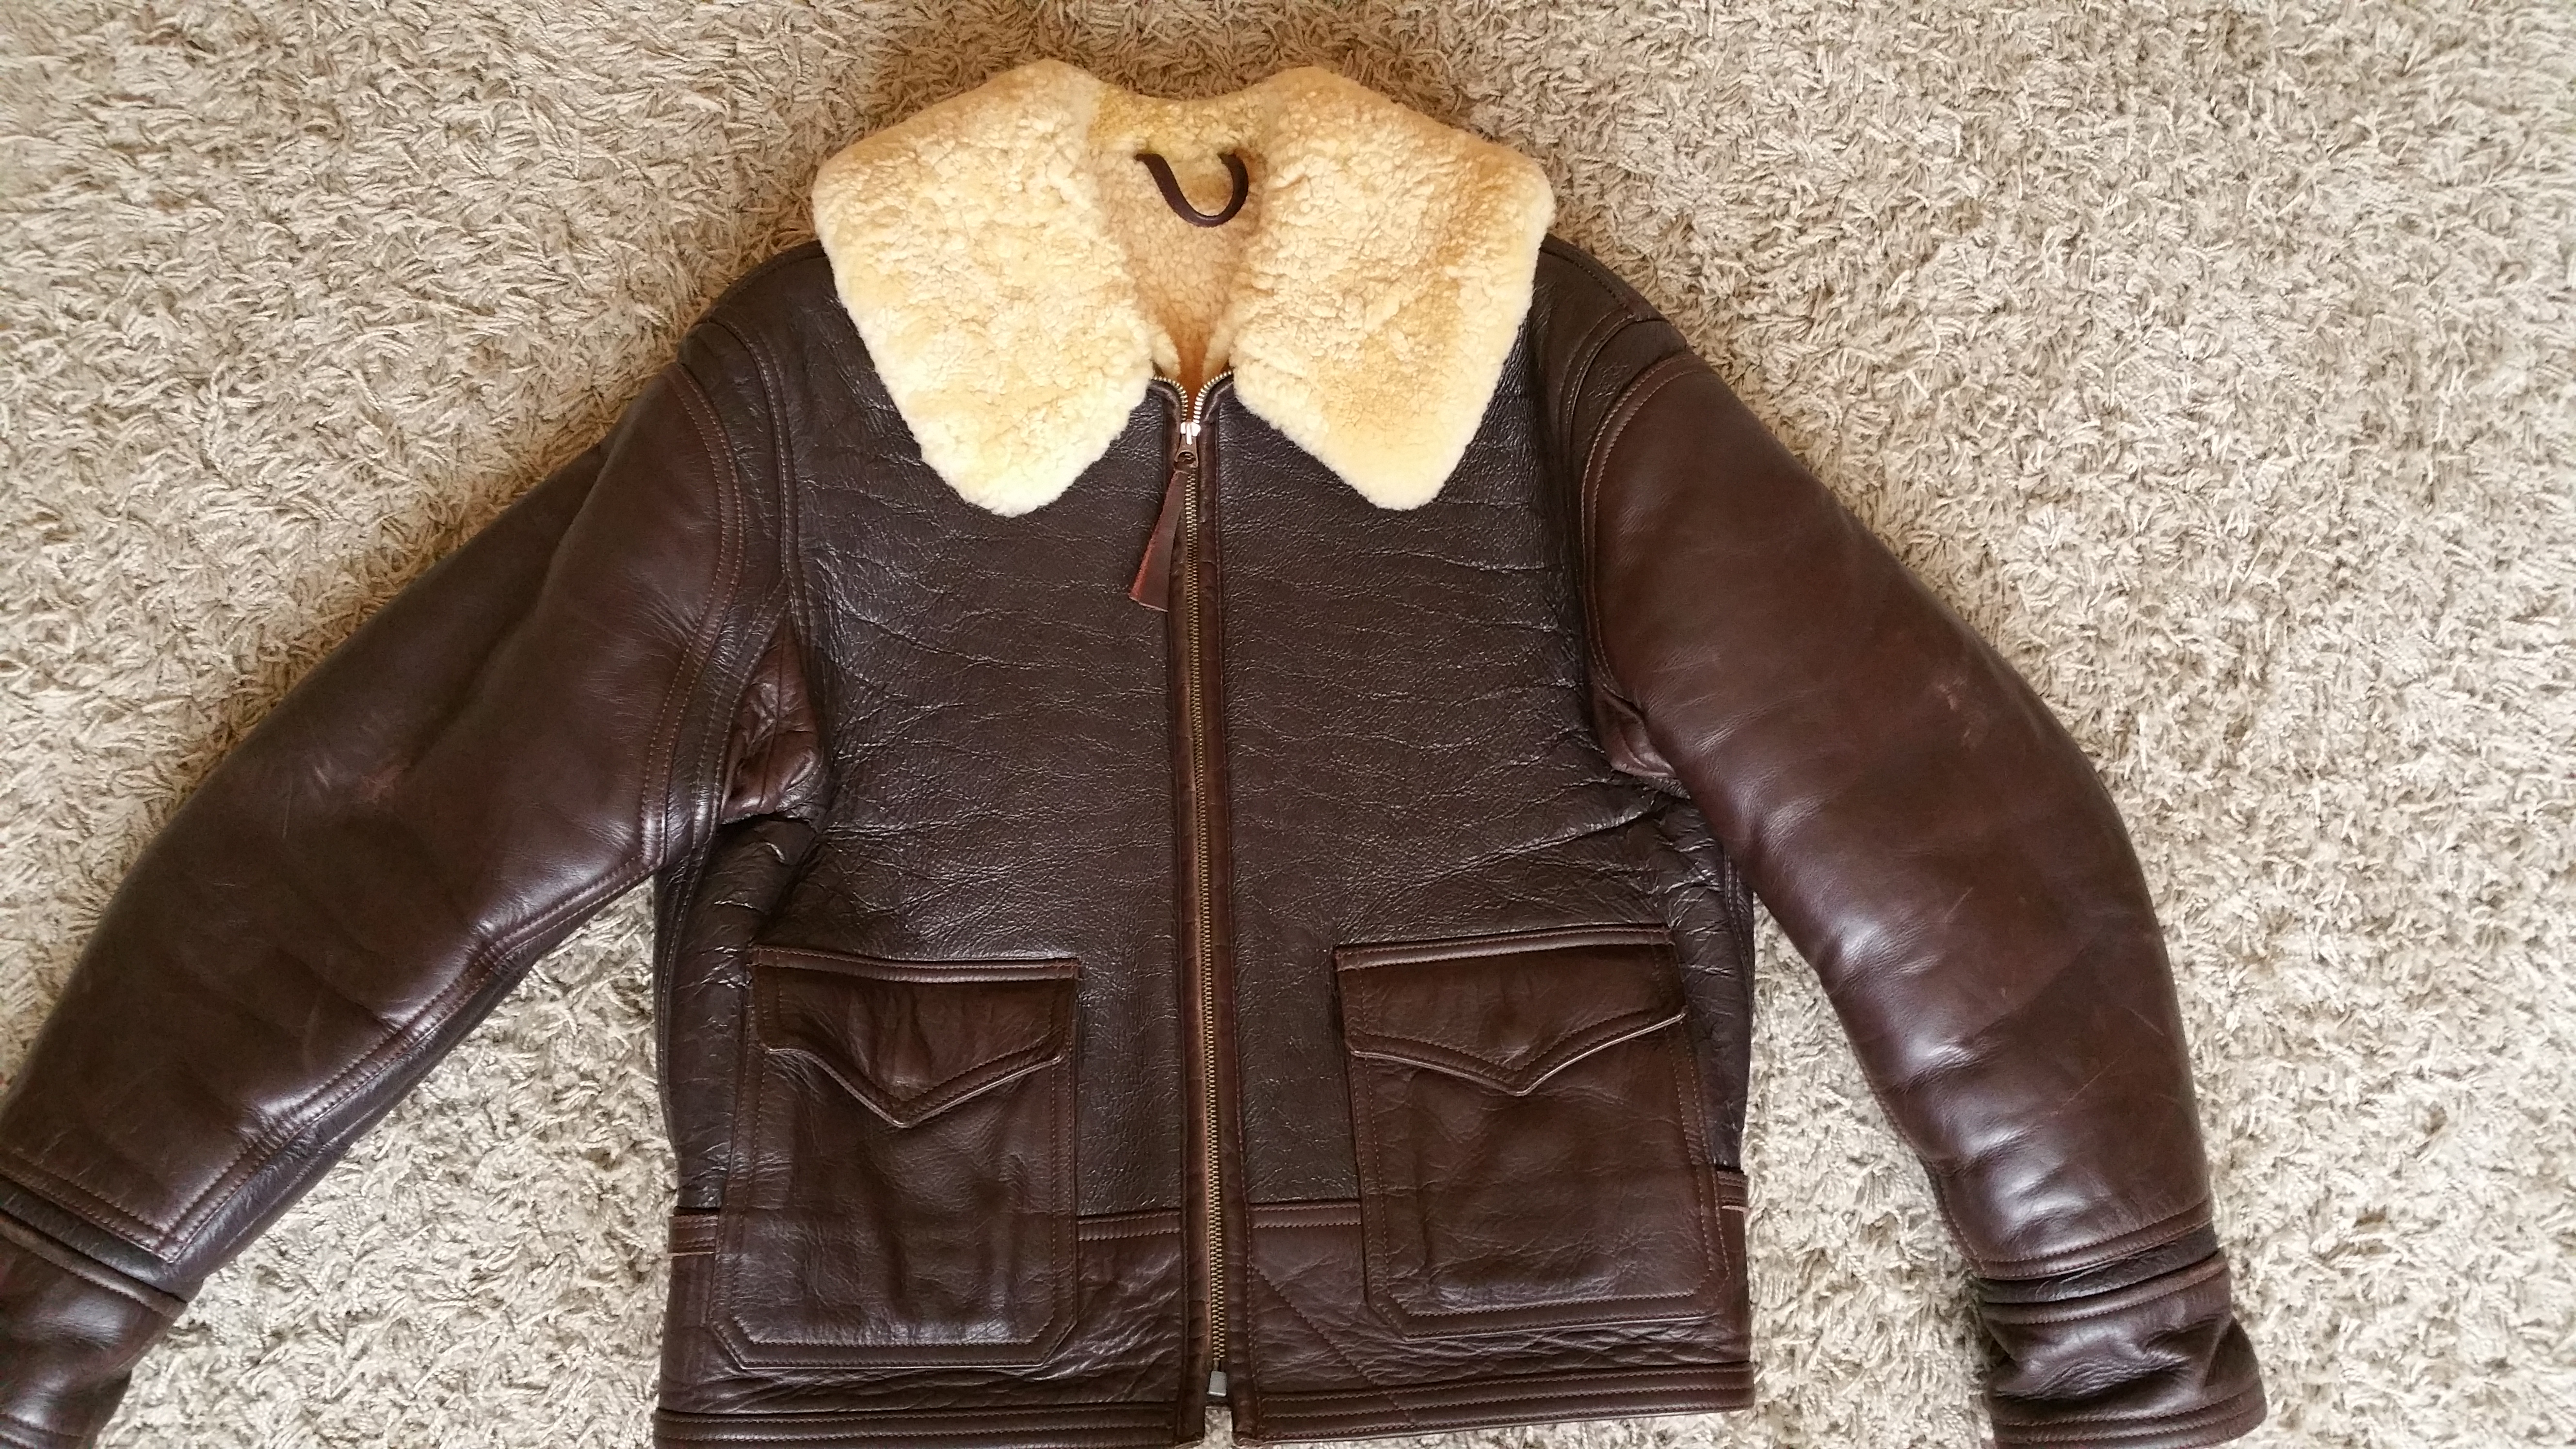 Some Eastman Photos | Page 2 | Vintage Leather Jackets Forum